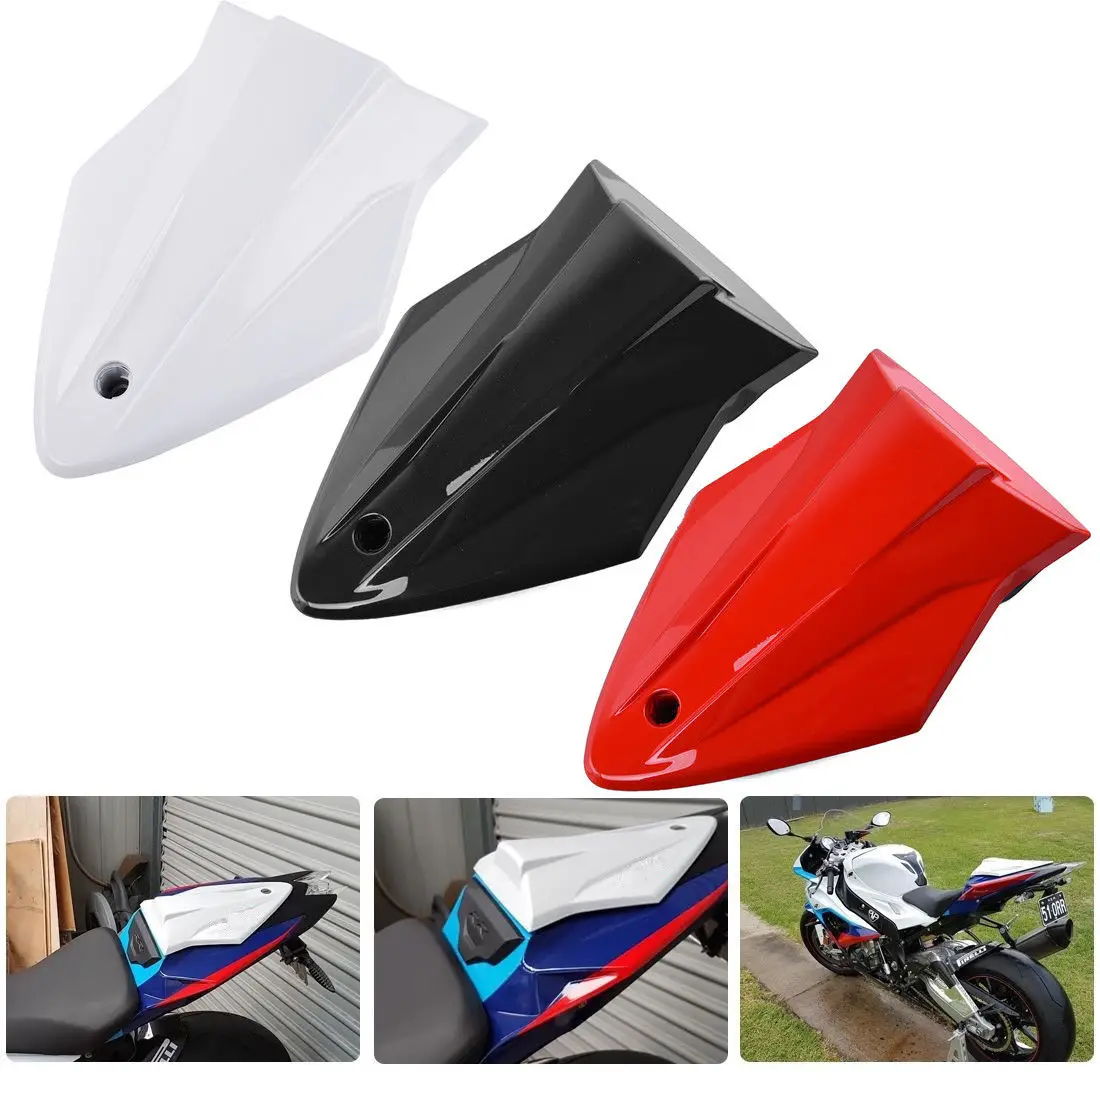 Motorcycle Pillion Solo Rear Seat Cover Cowl Fairing for BMW S1000RR S1000 RR HP4 S1000R 2014 2015 2016 2017 2018 2019 Black Red